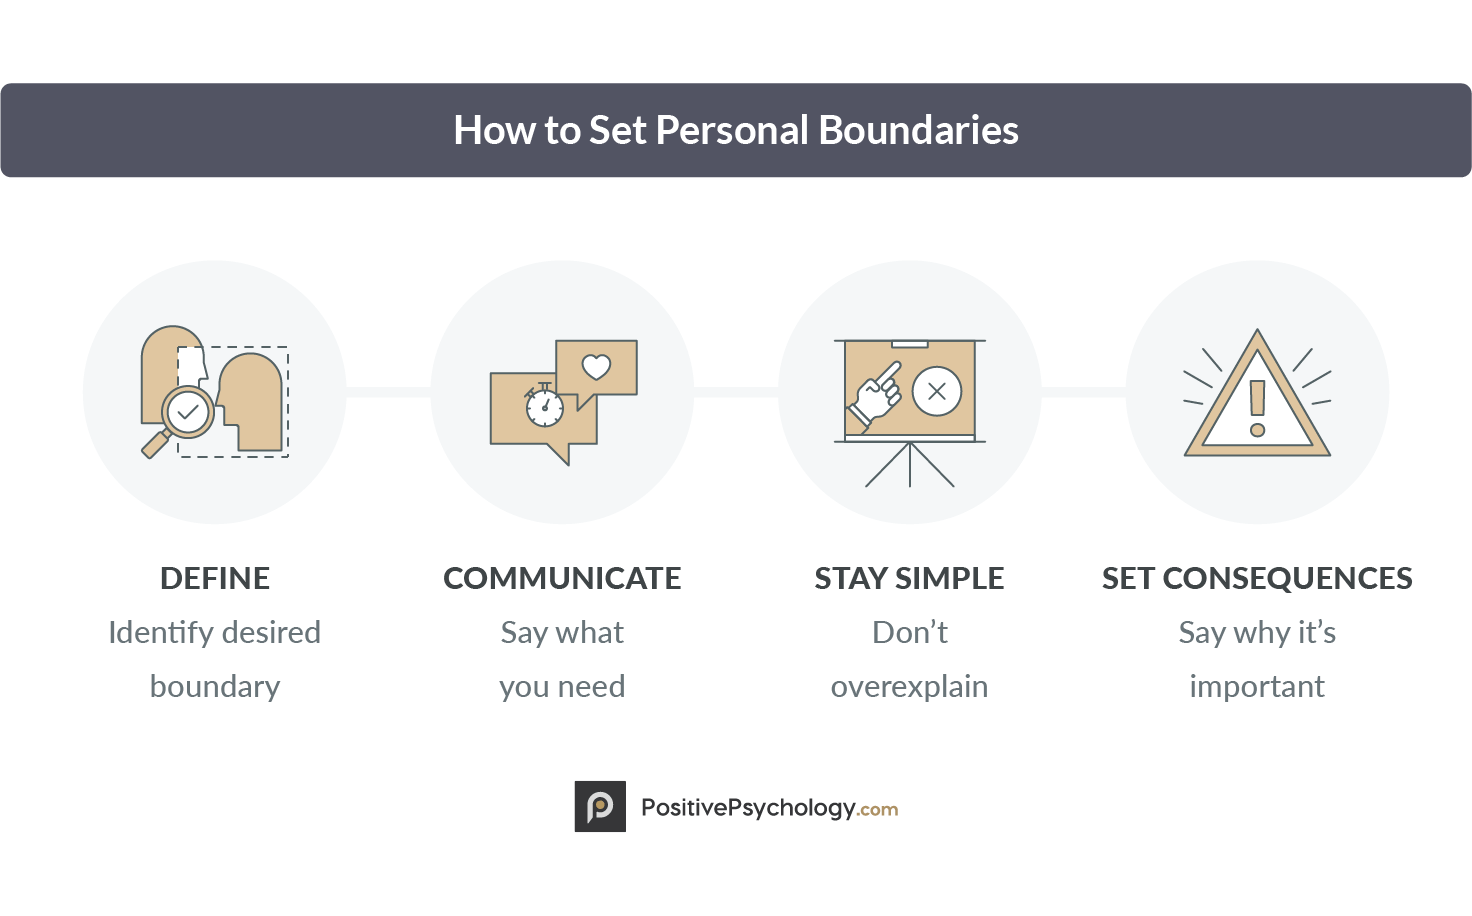 How to Set Personal Boundaries